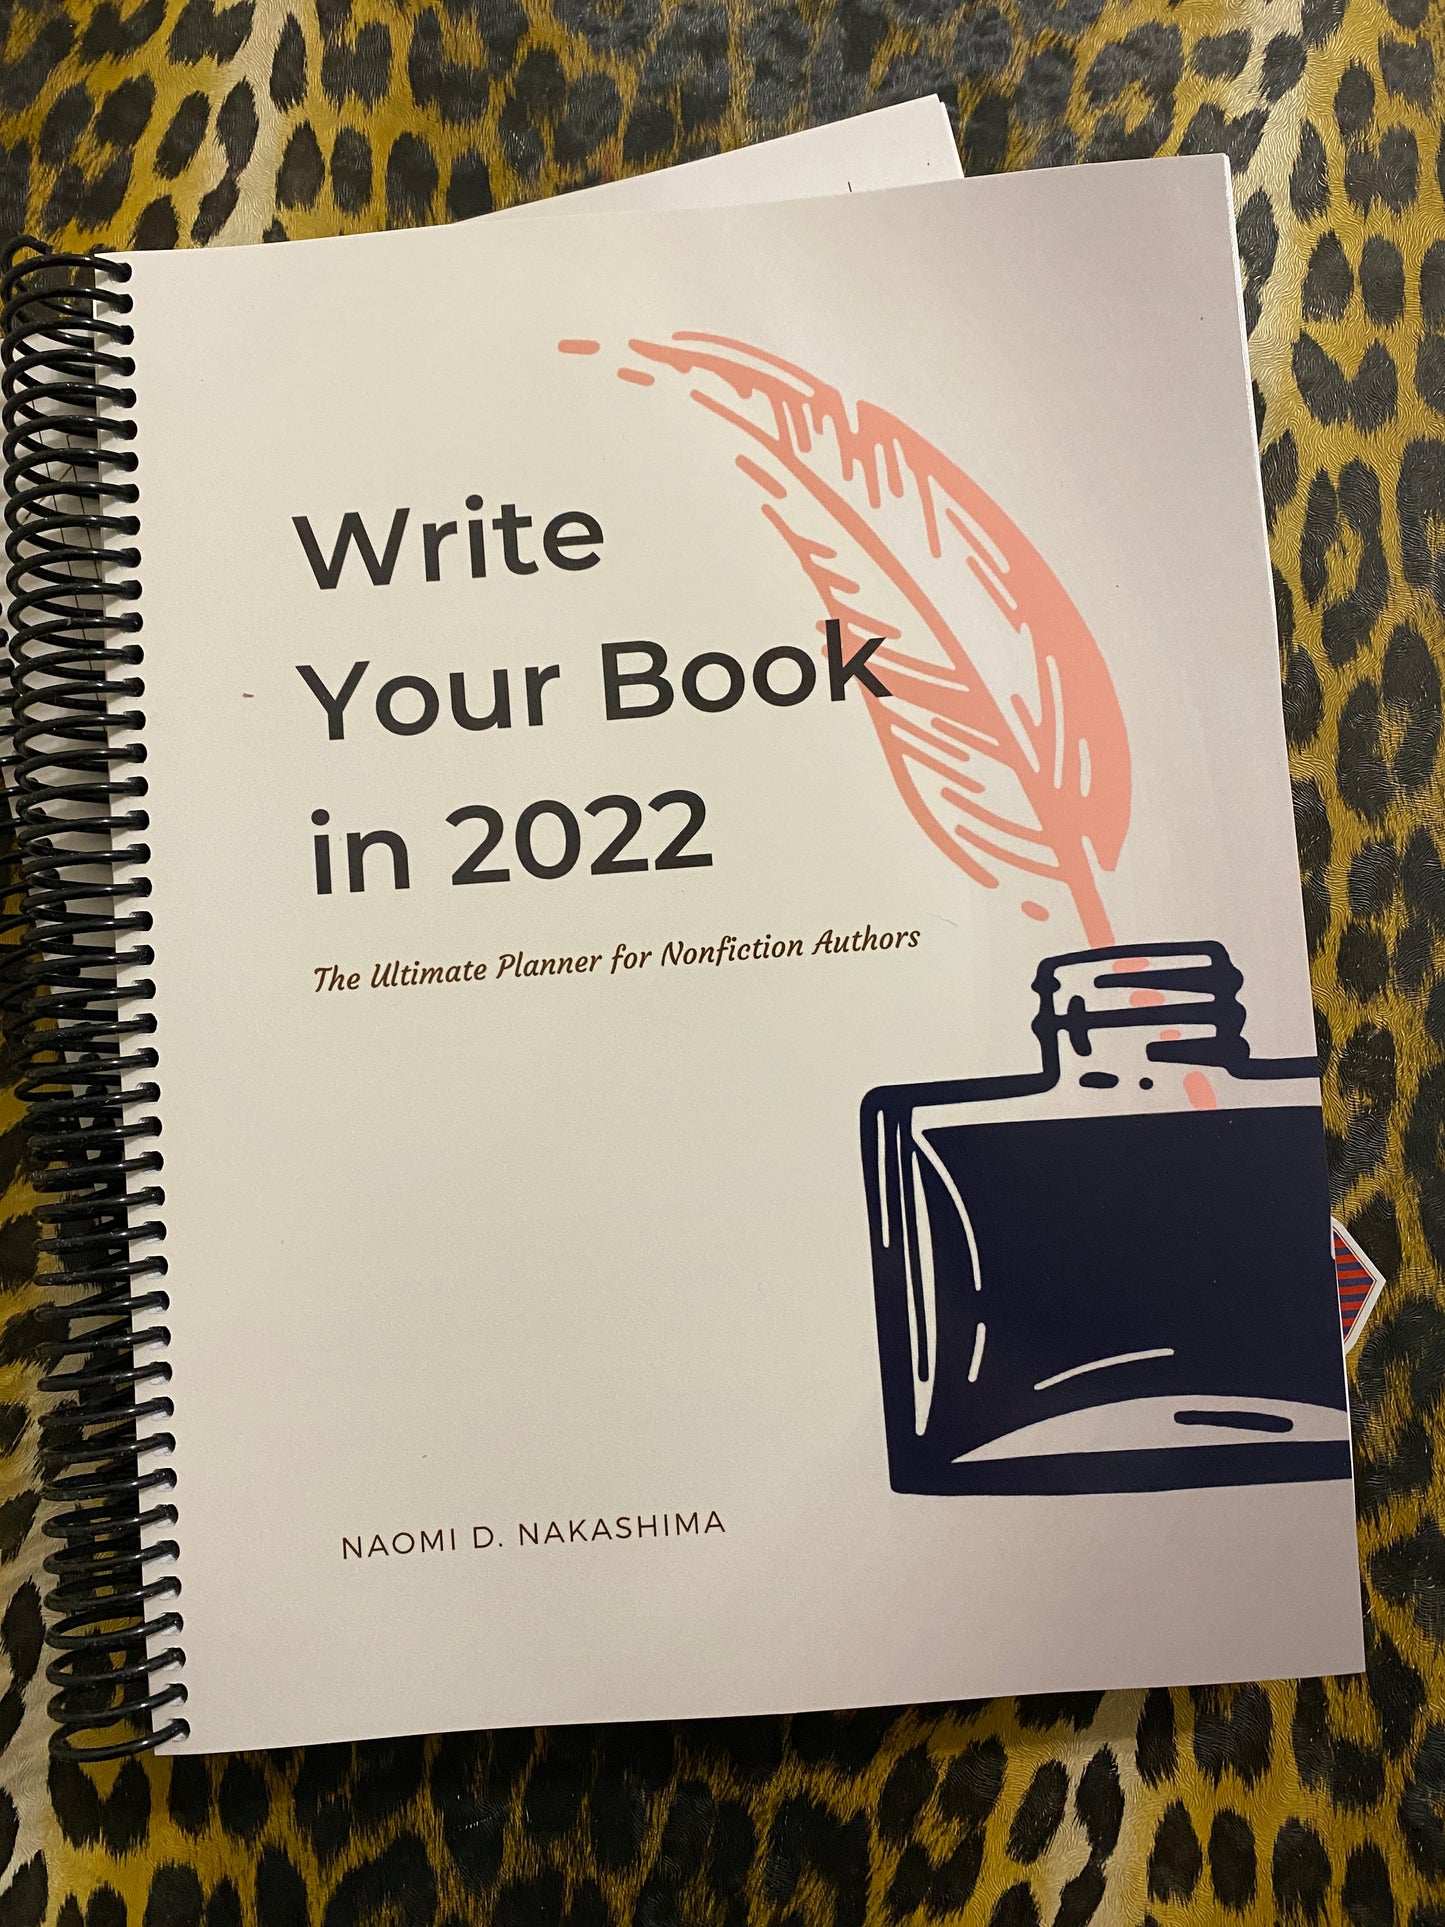 Use the 2022 planner to help authors write their nonfiction books.